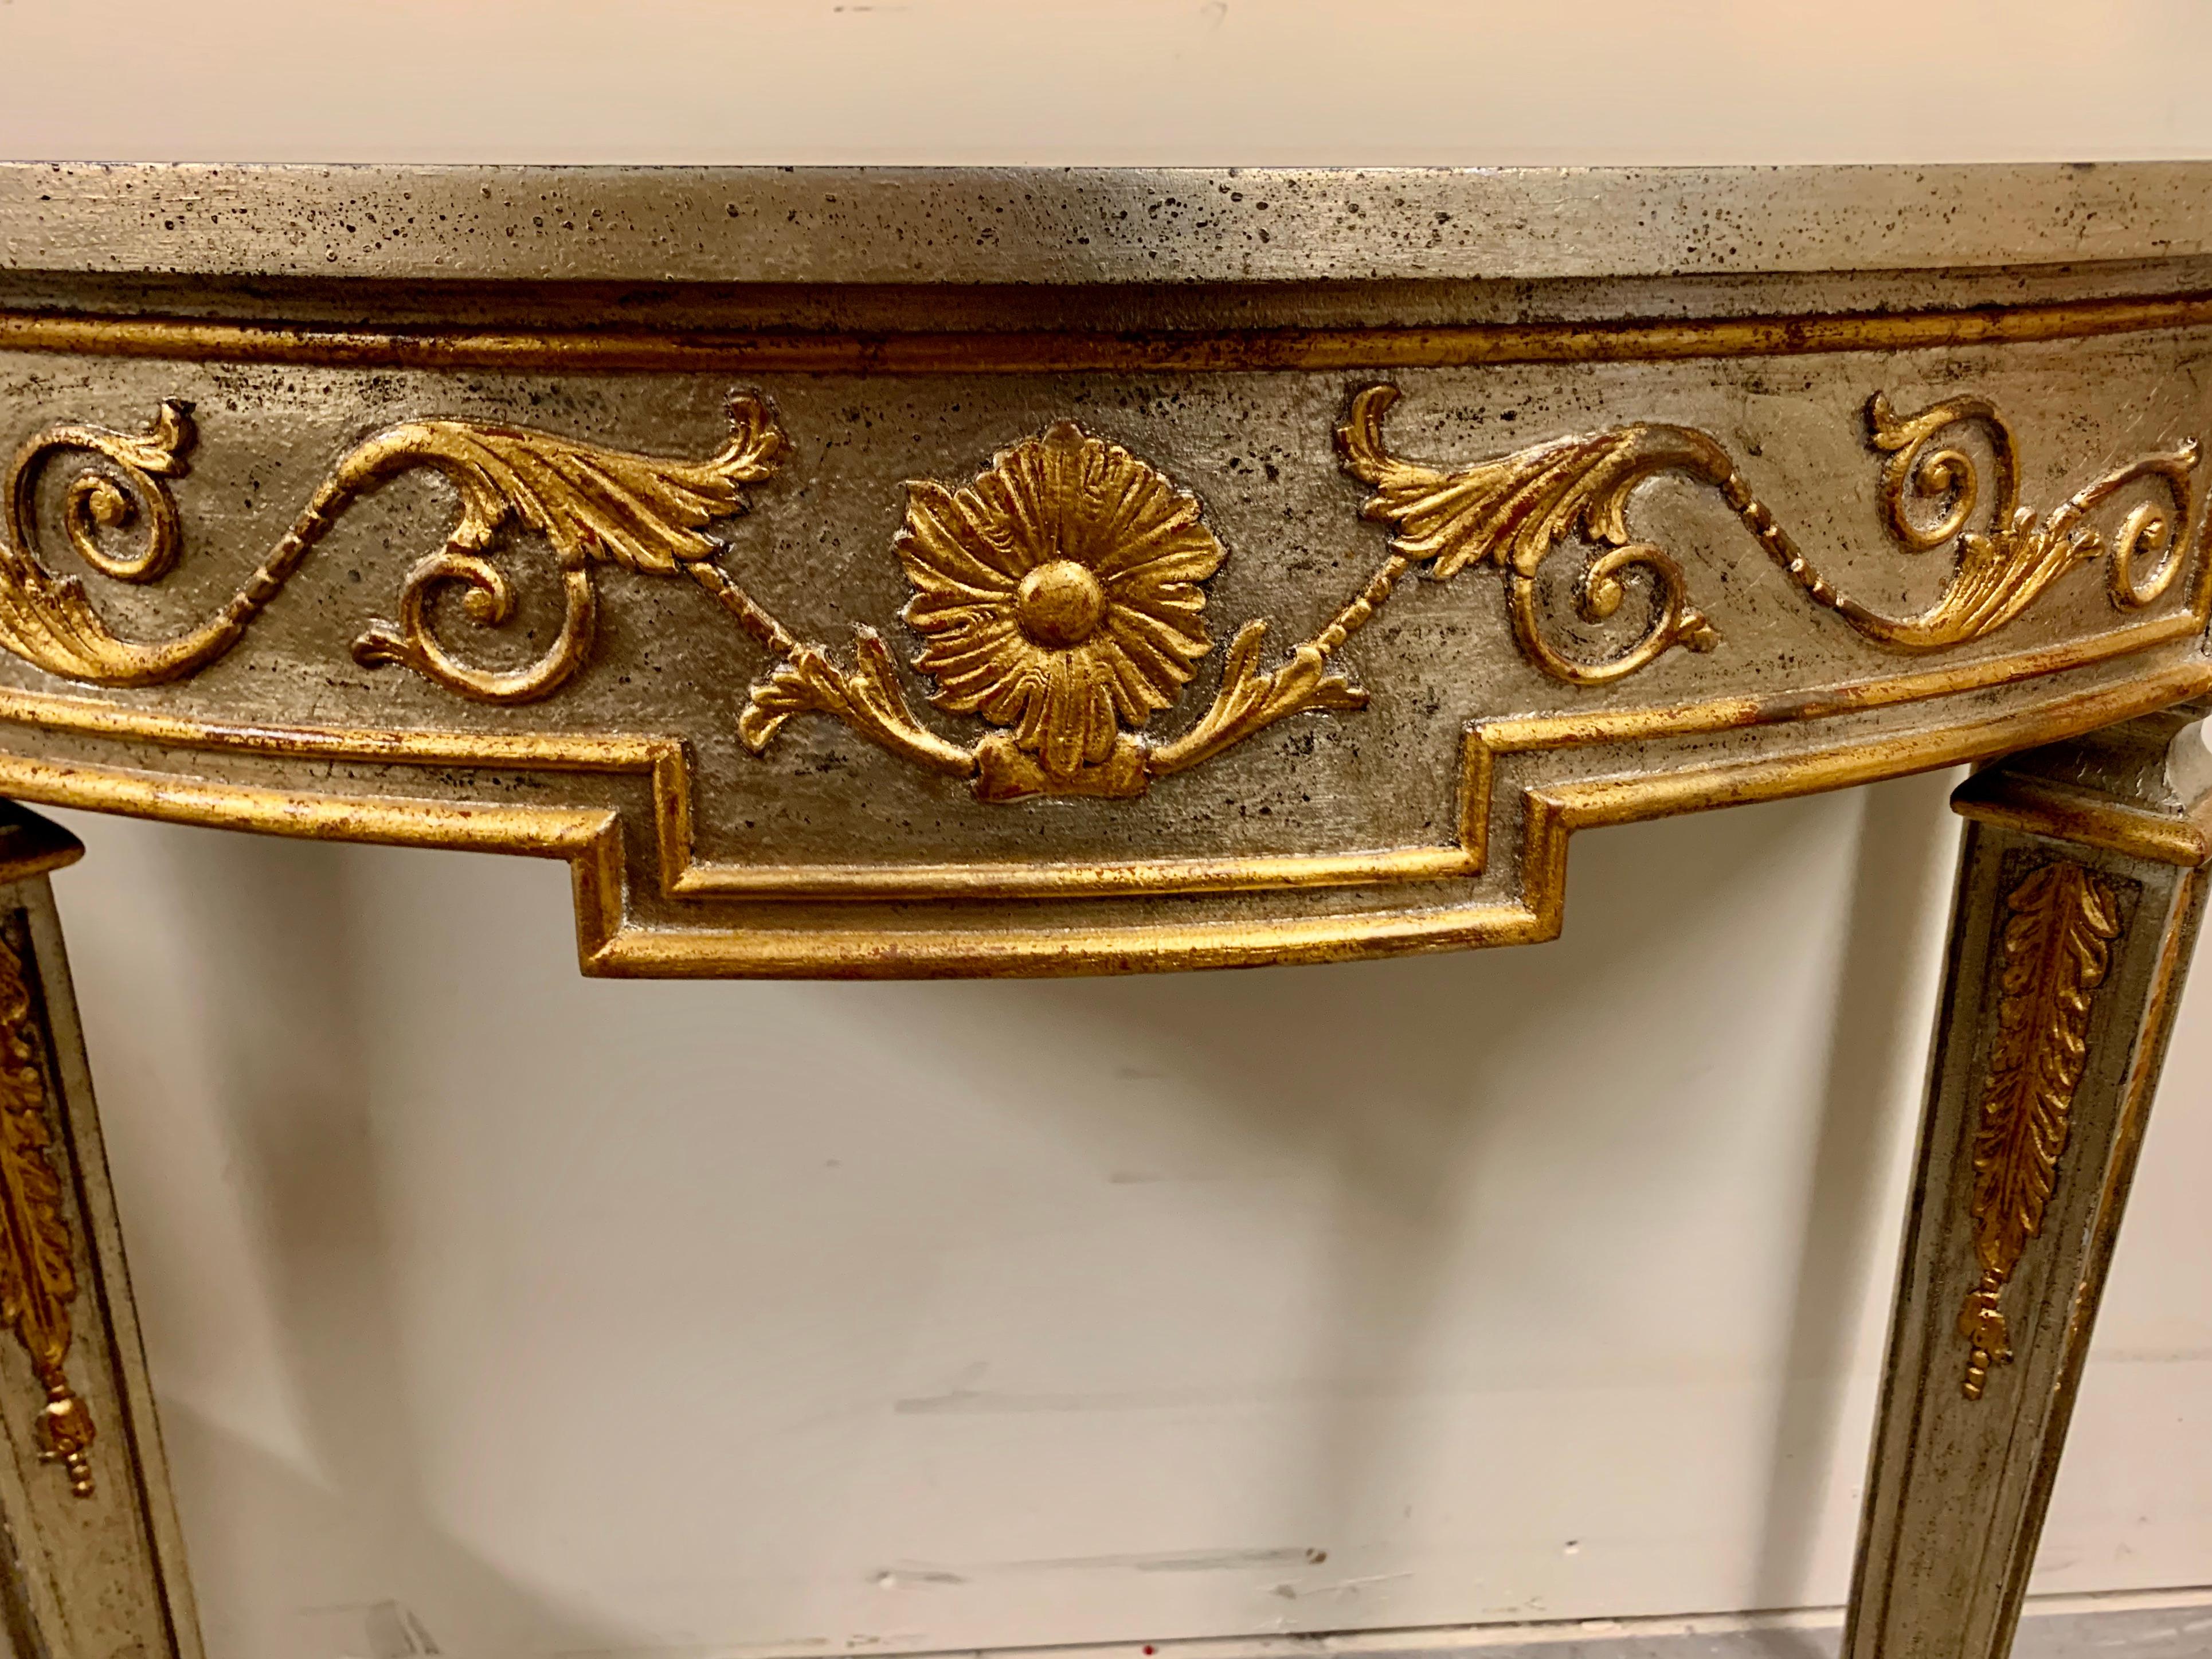 Sliver leafed demi lune table. The frieze on the apron and legs are all picked out in gold leaf.
The table was created by Stuart Swan of Wellesley, Mass.
The table remains in pristine condition.
Measures: H-33.5